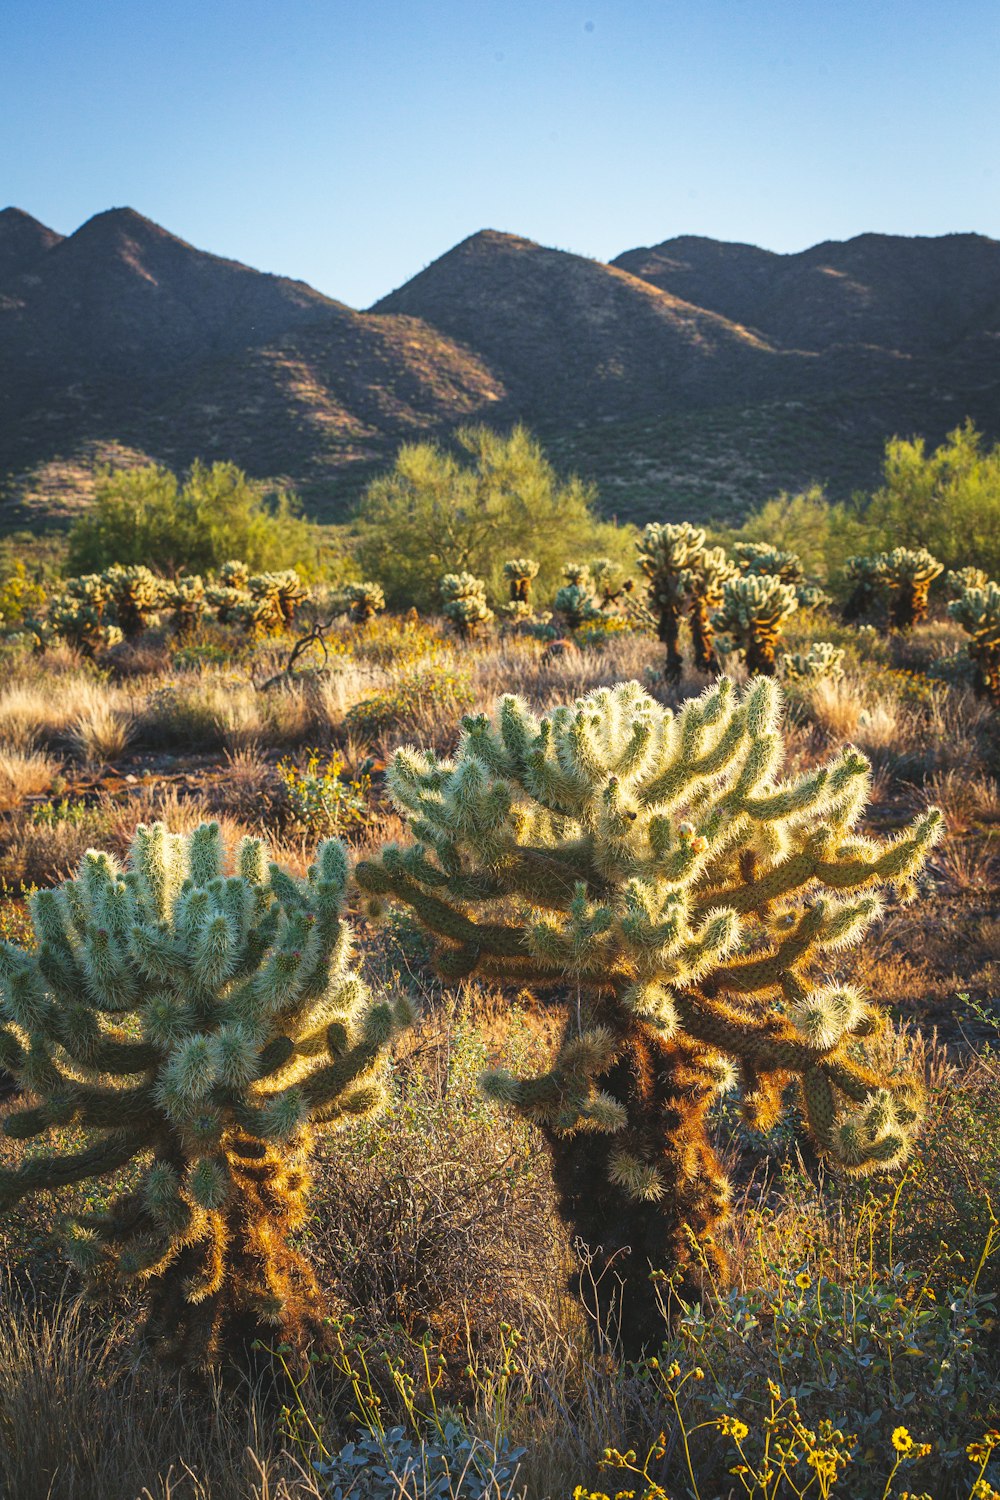 a group of cactus plants in a field with mountains in the background